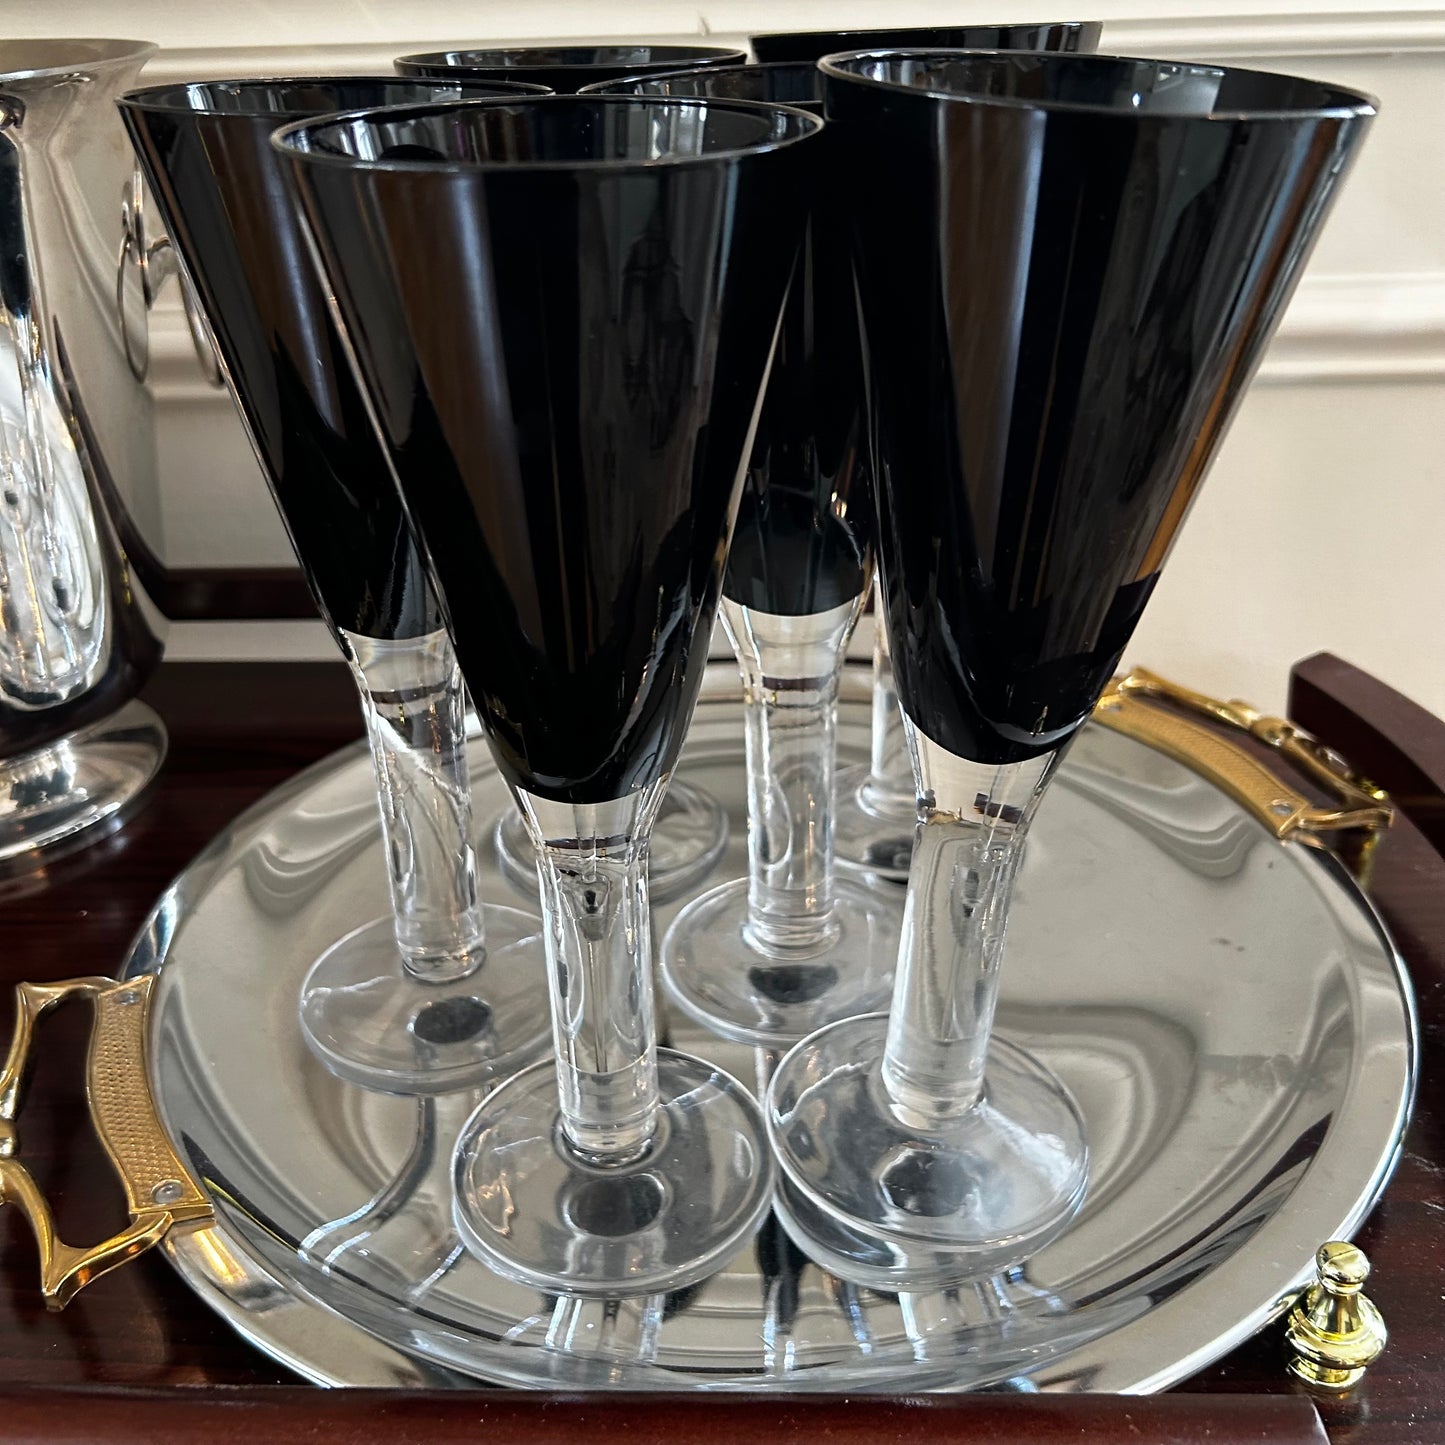 Set of six statuesque and chic black wine glasses